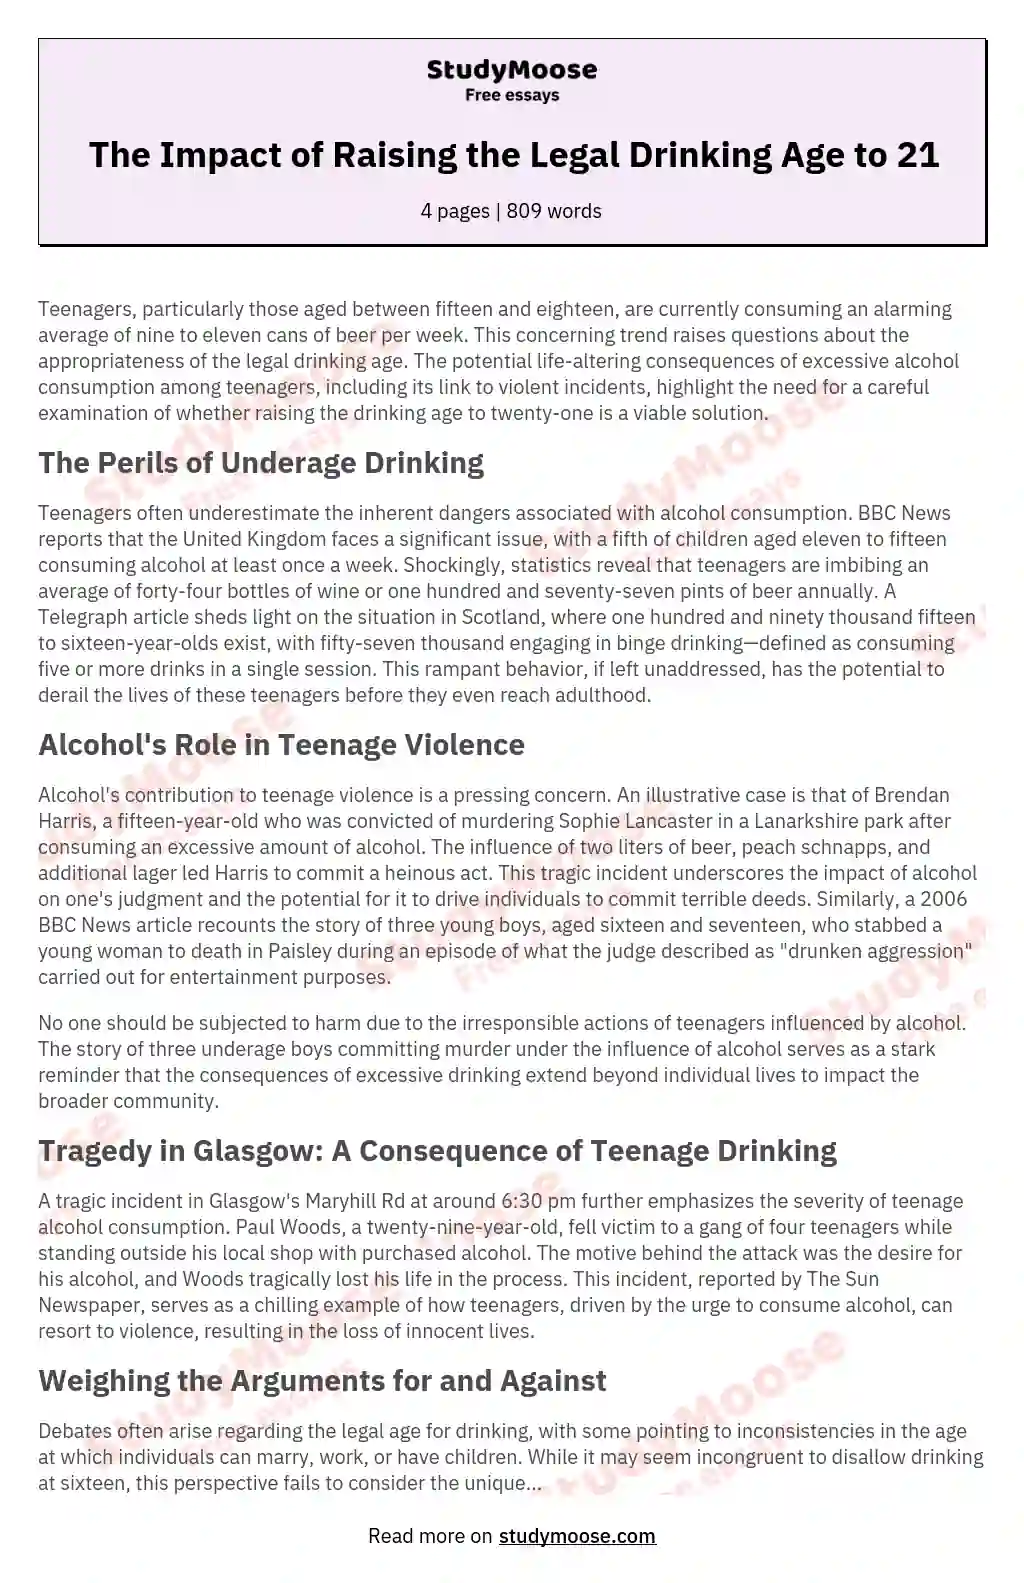 argumentative essay on lowering the drinking age to 18